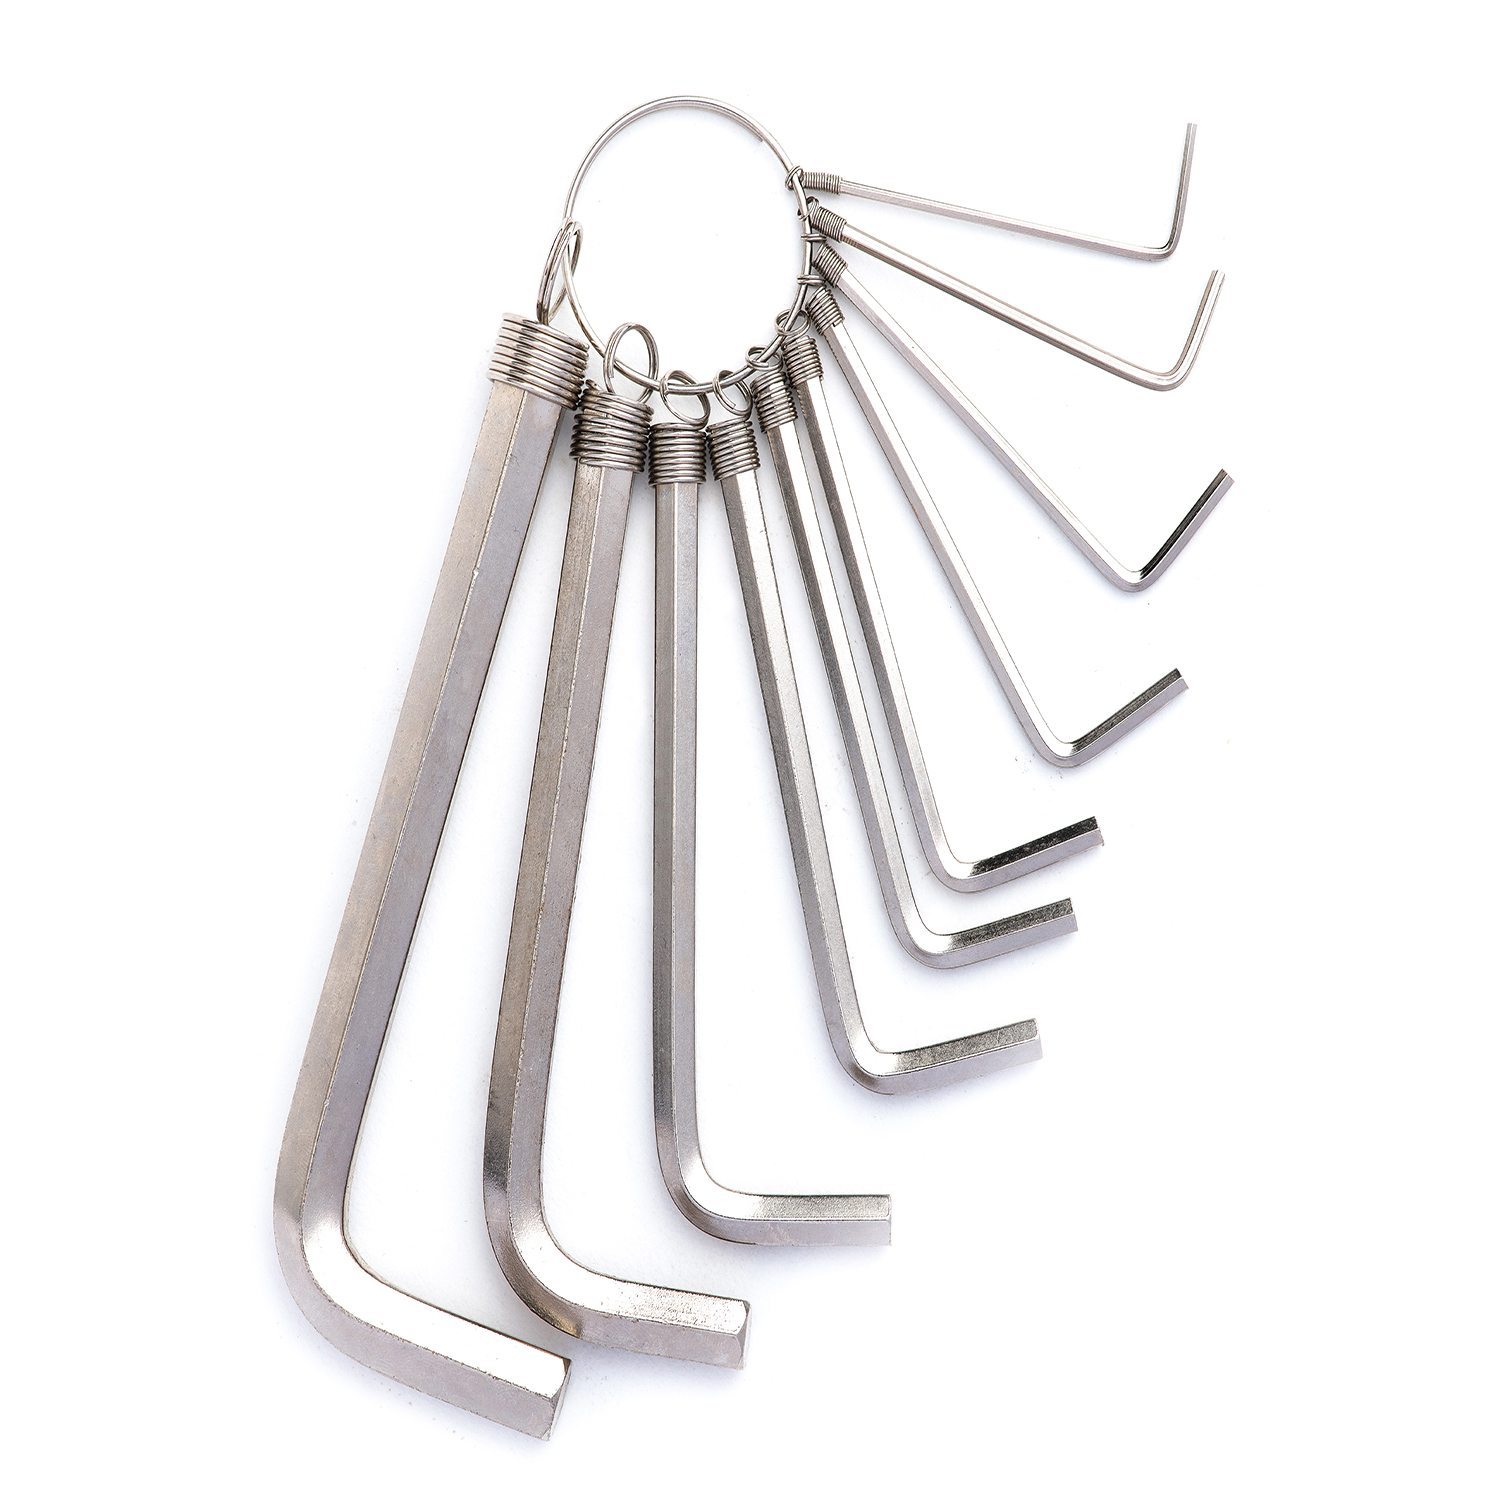 insulated Hex Keys with flat end for Install